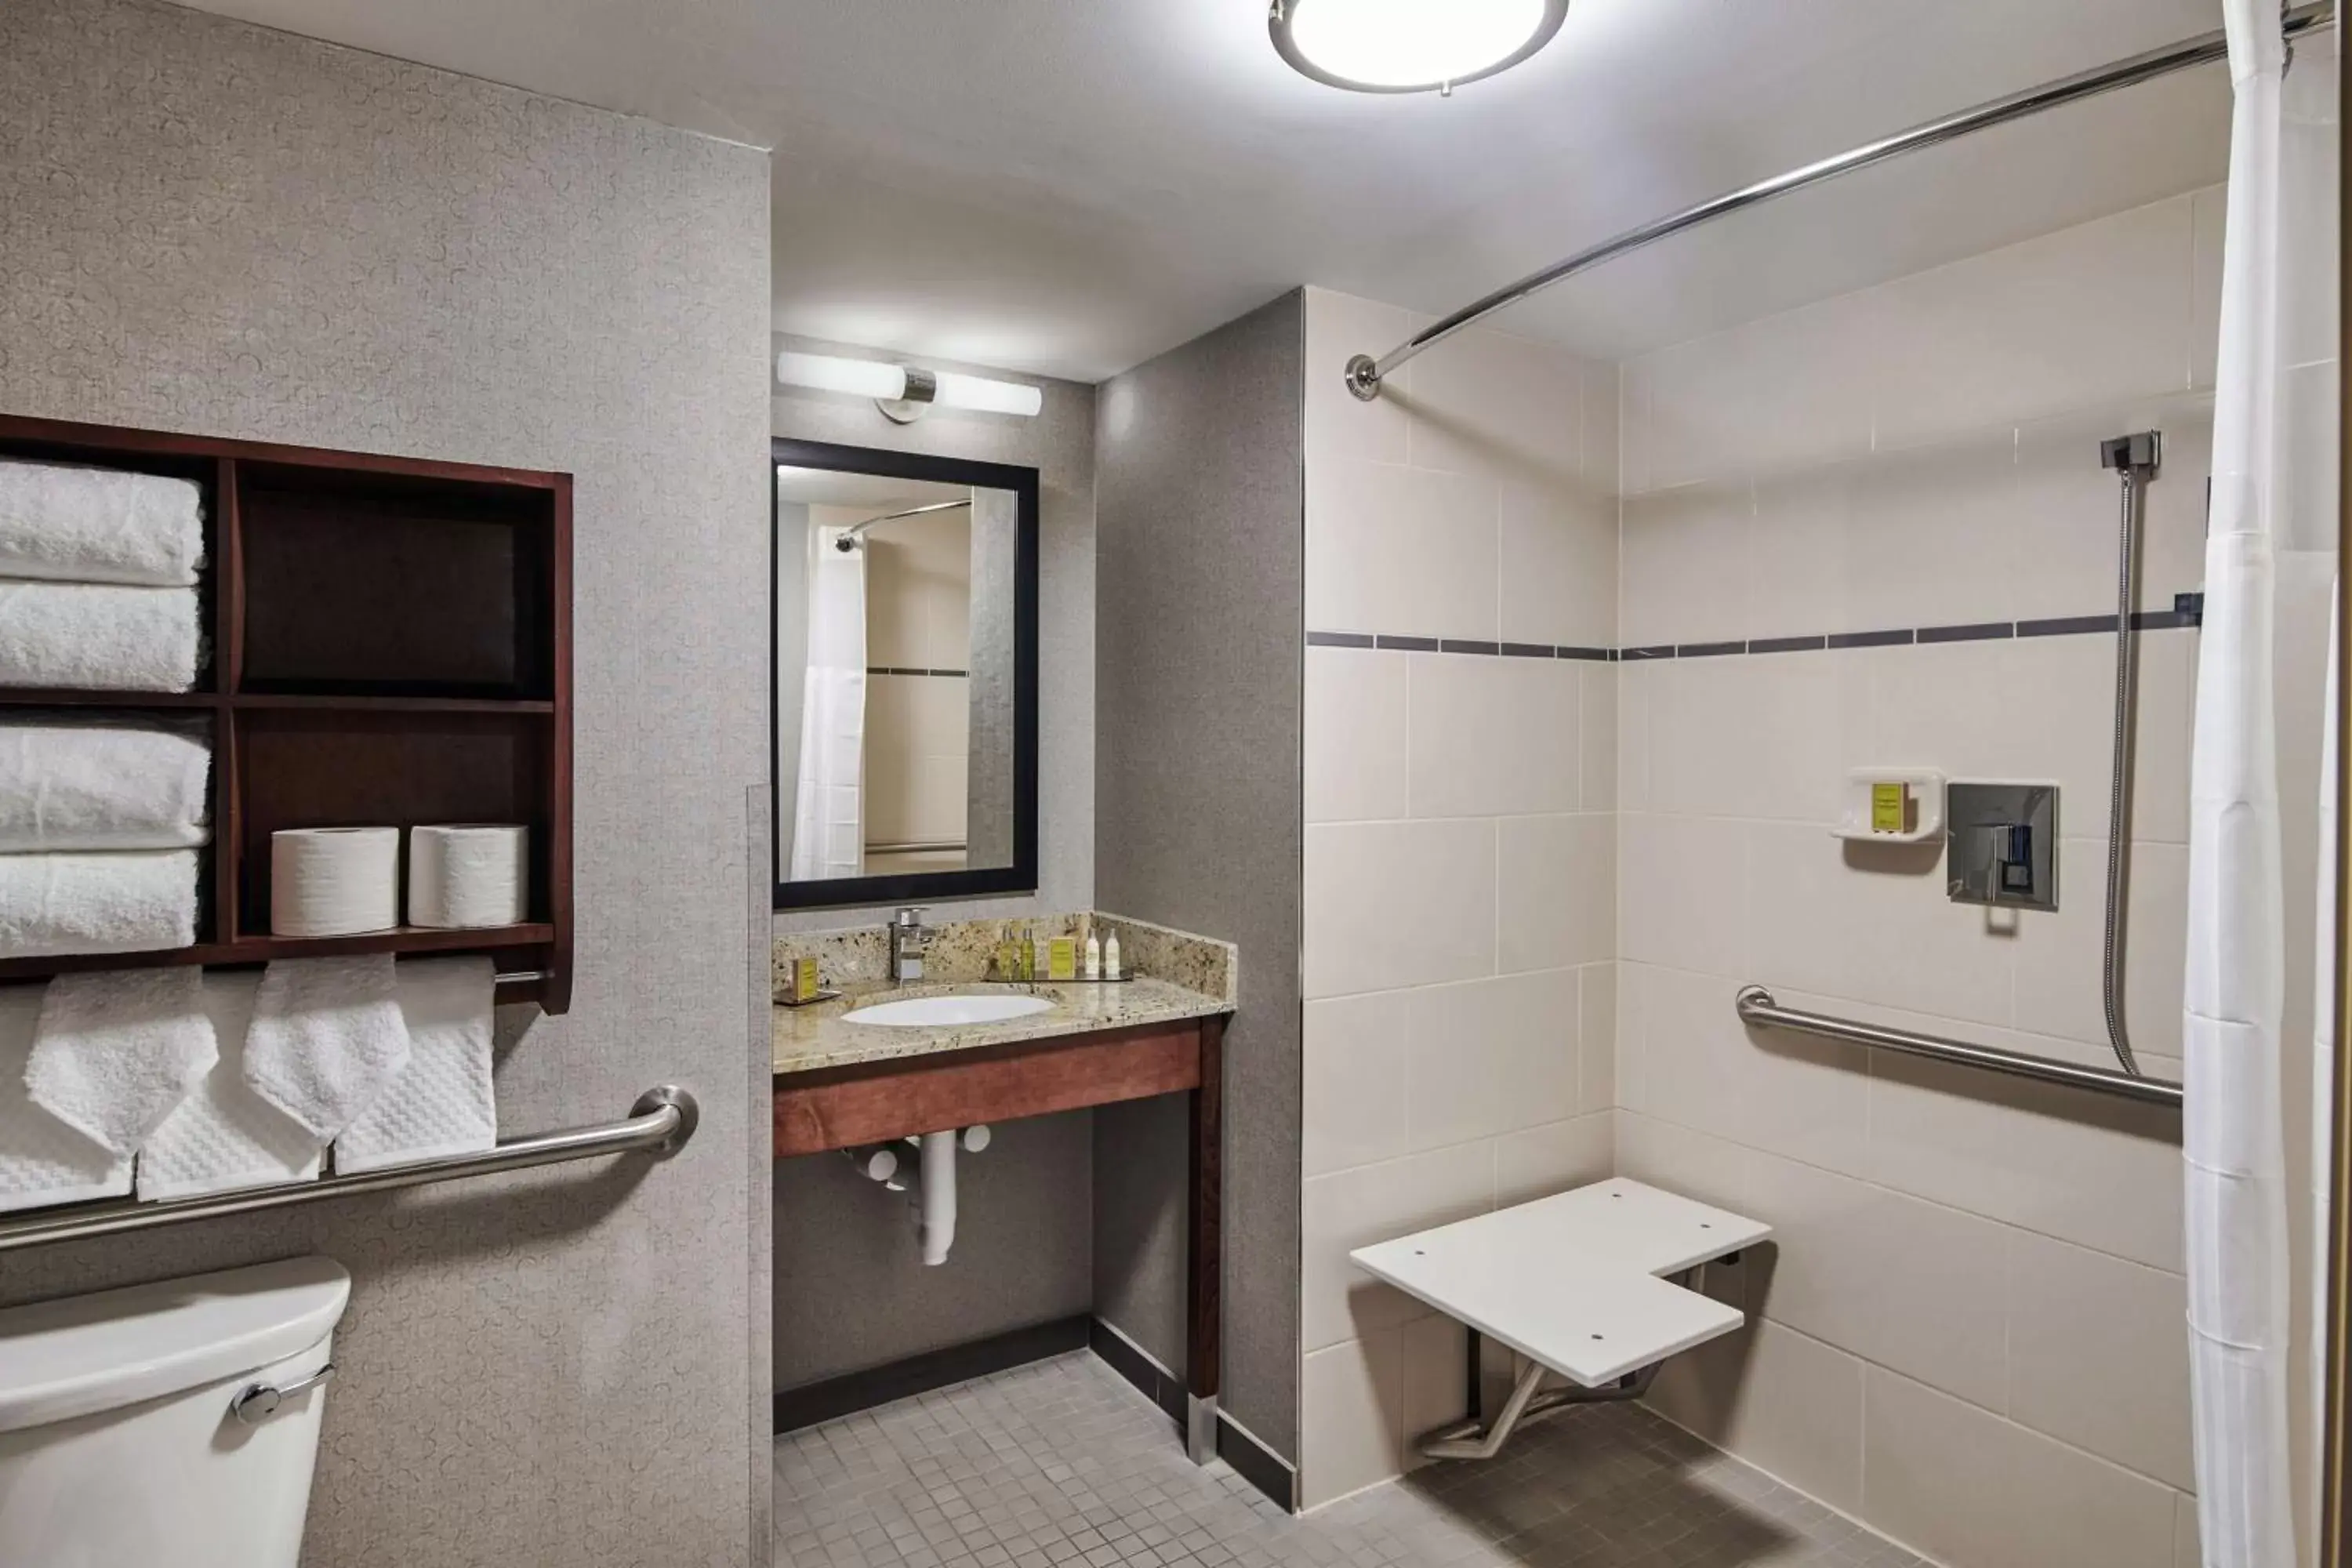 Bathroom in Doubletree By Hilton Raleigh Crabtree Valley